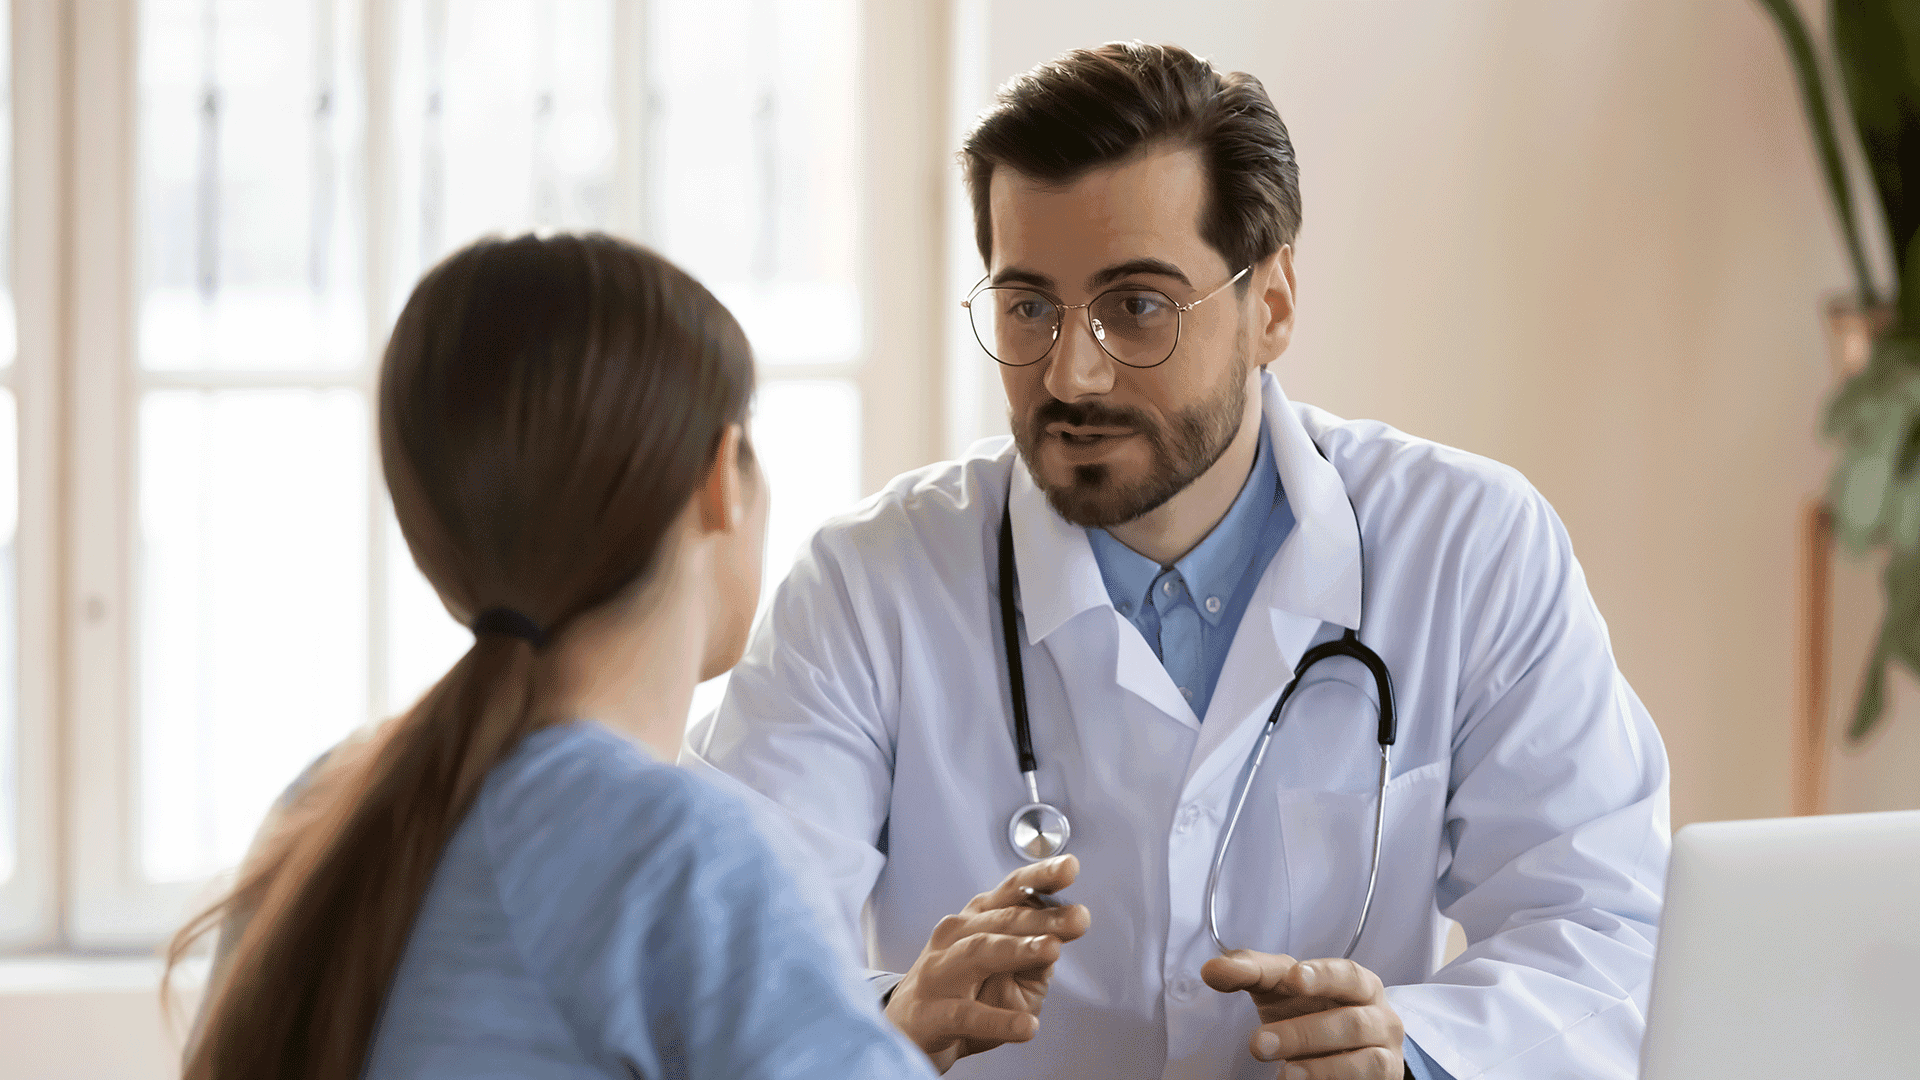 Illustration: Doctor and young patient in conversation